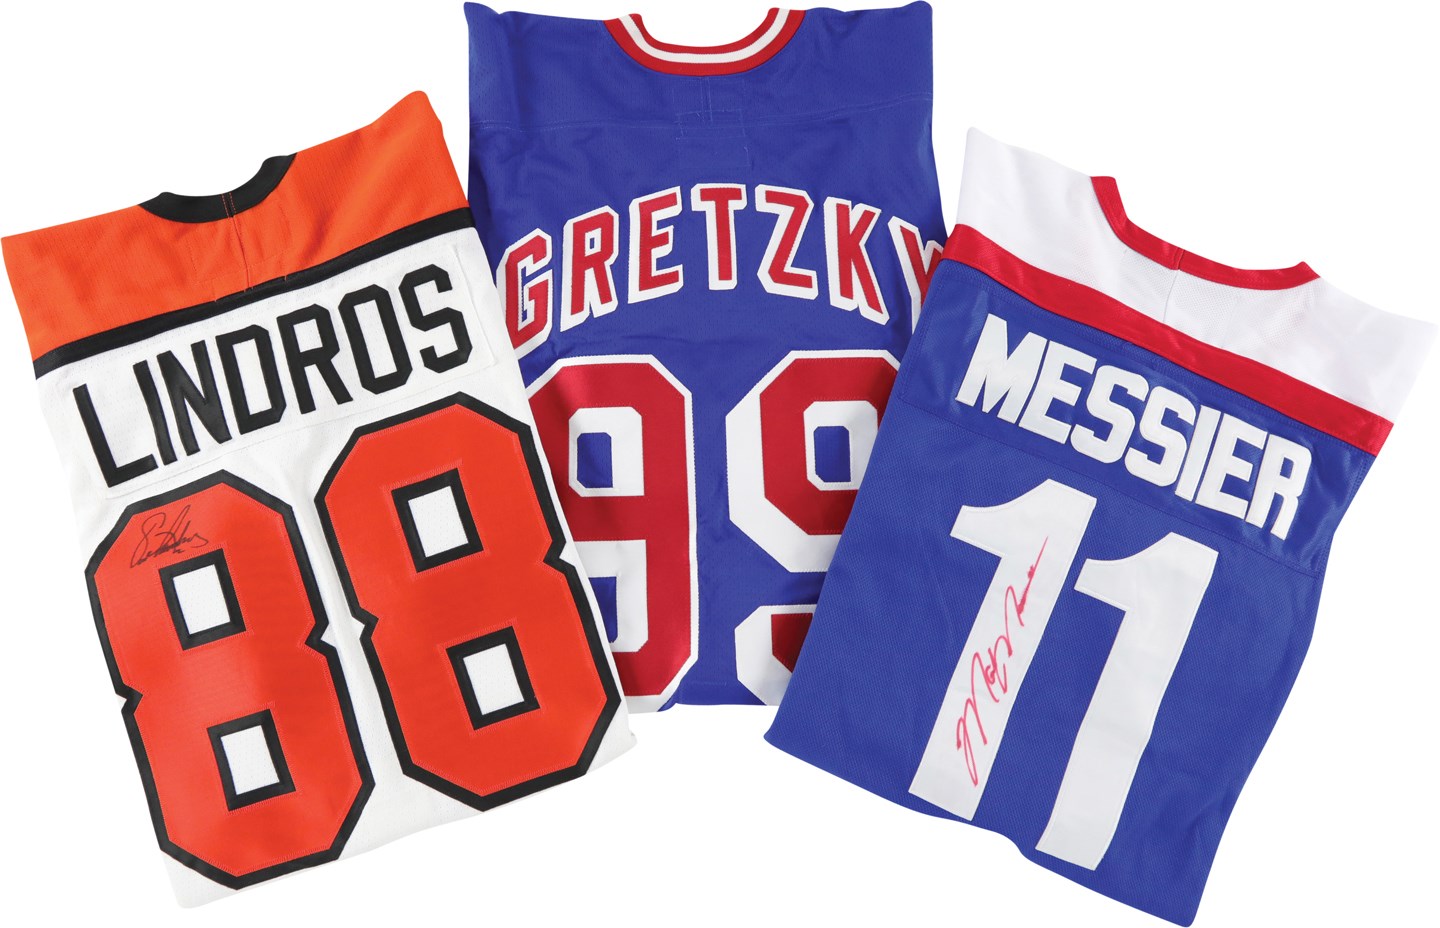 Hockey - Hockey Jerseys - Gretzky Rangers Pro Model, Messier Signed Jersey, and Lindros Signed Jersey